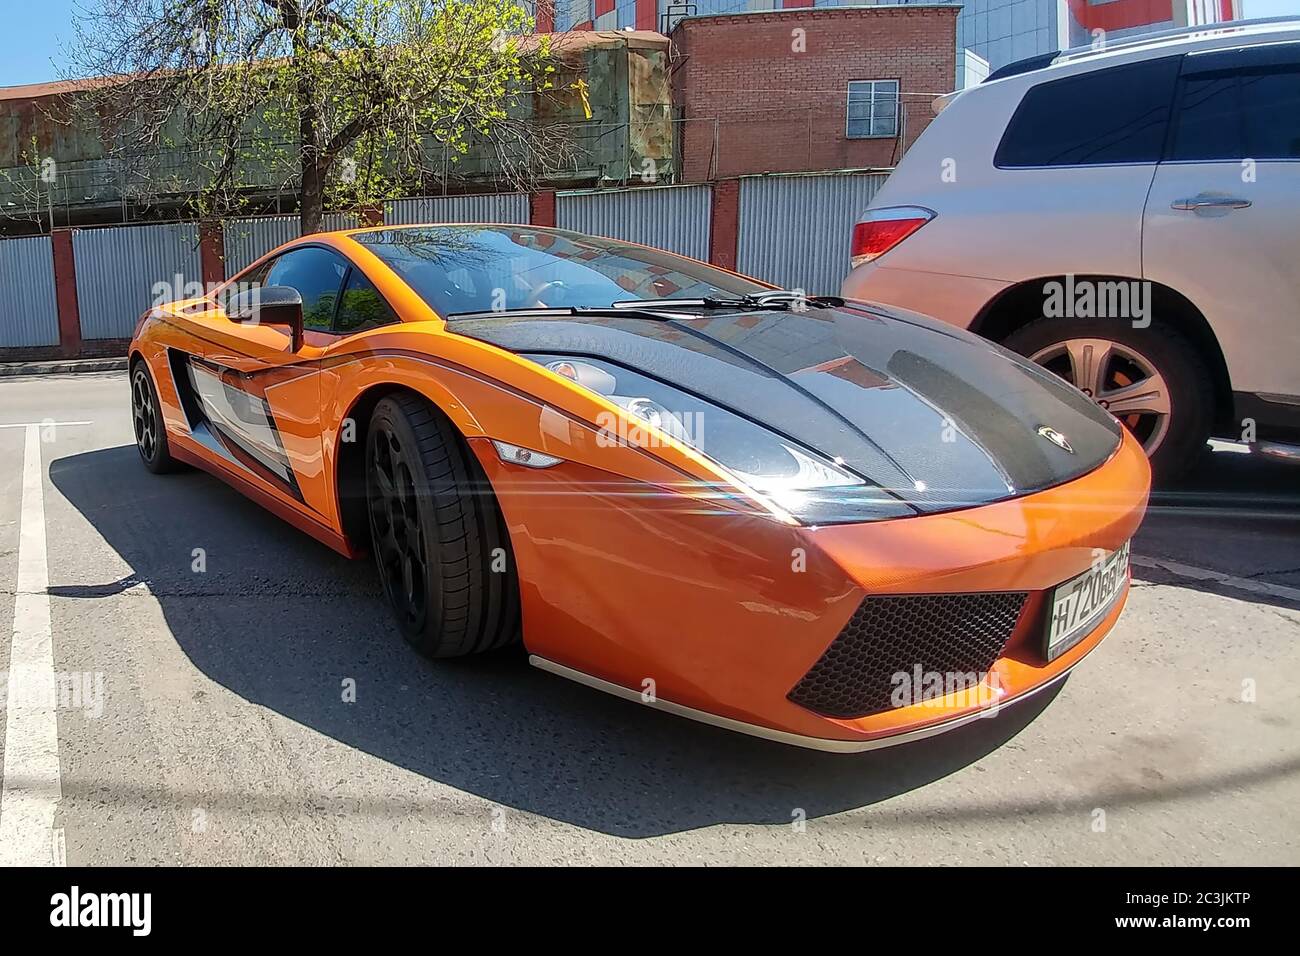 Moscow, Russia - April 14, 2019: bright orange Lamborghini Gallardo with carbon hood and other parts parked on the street Stock Photo